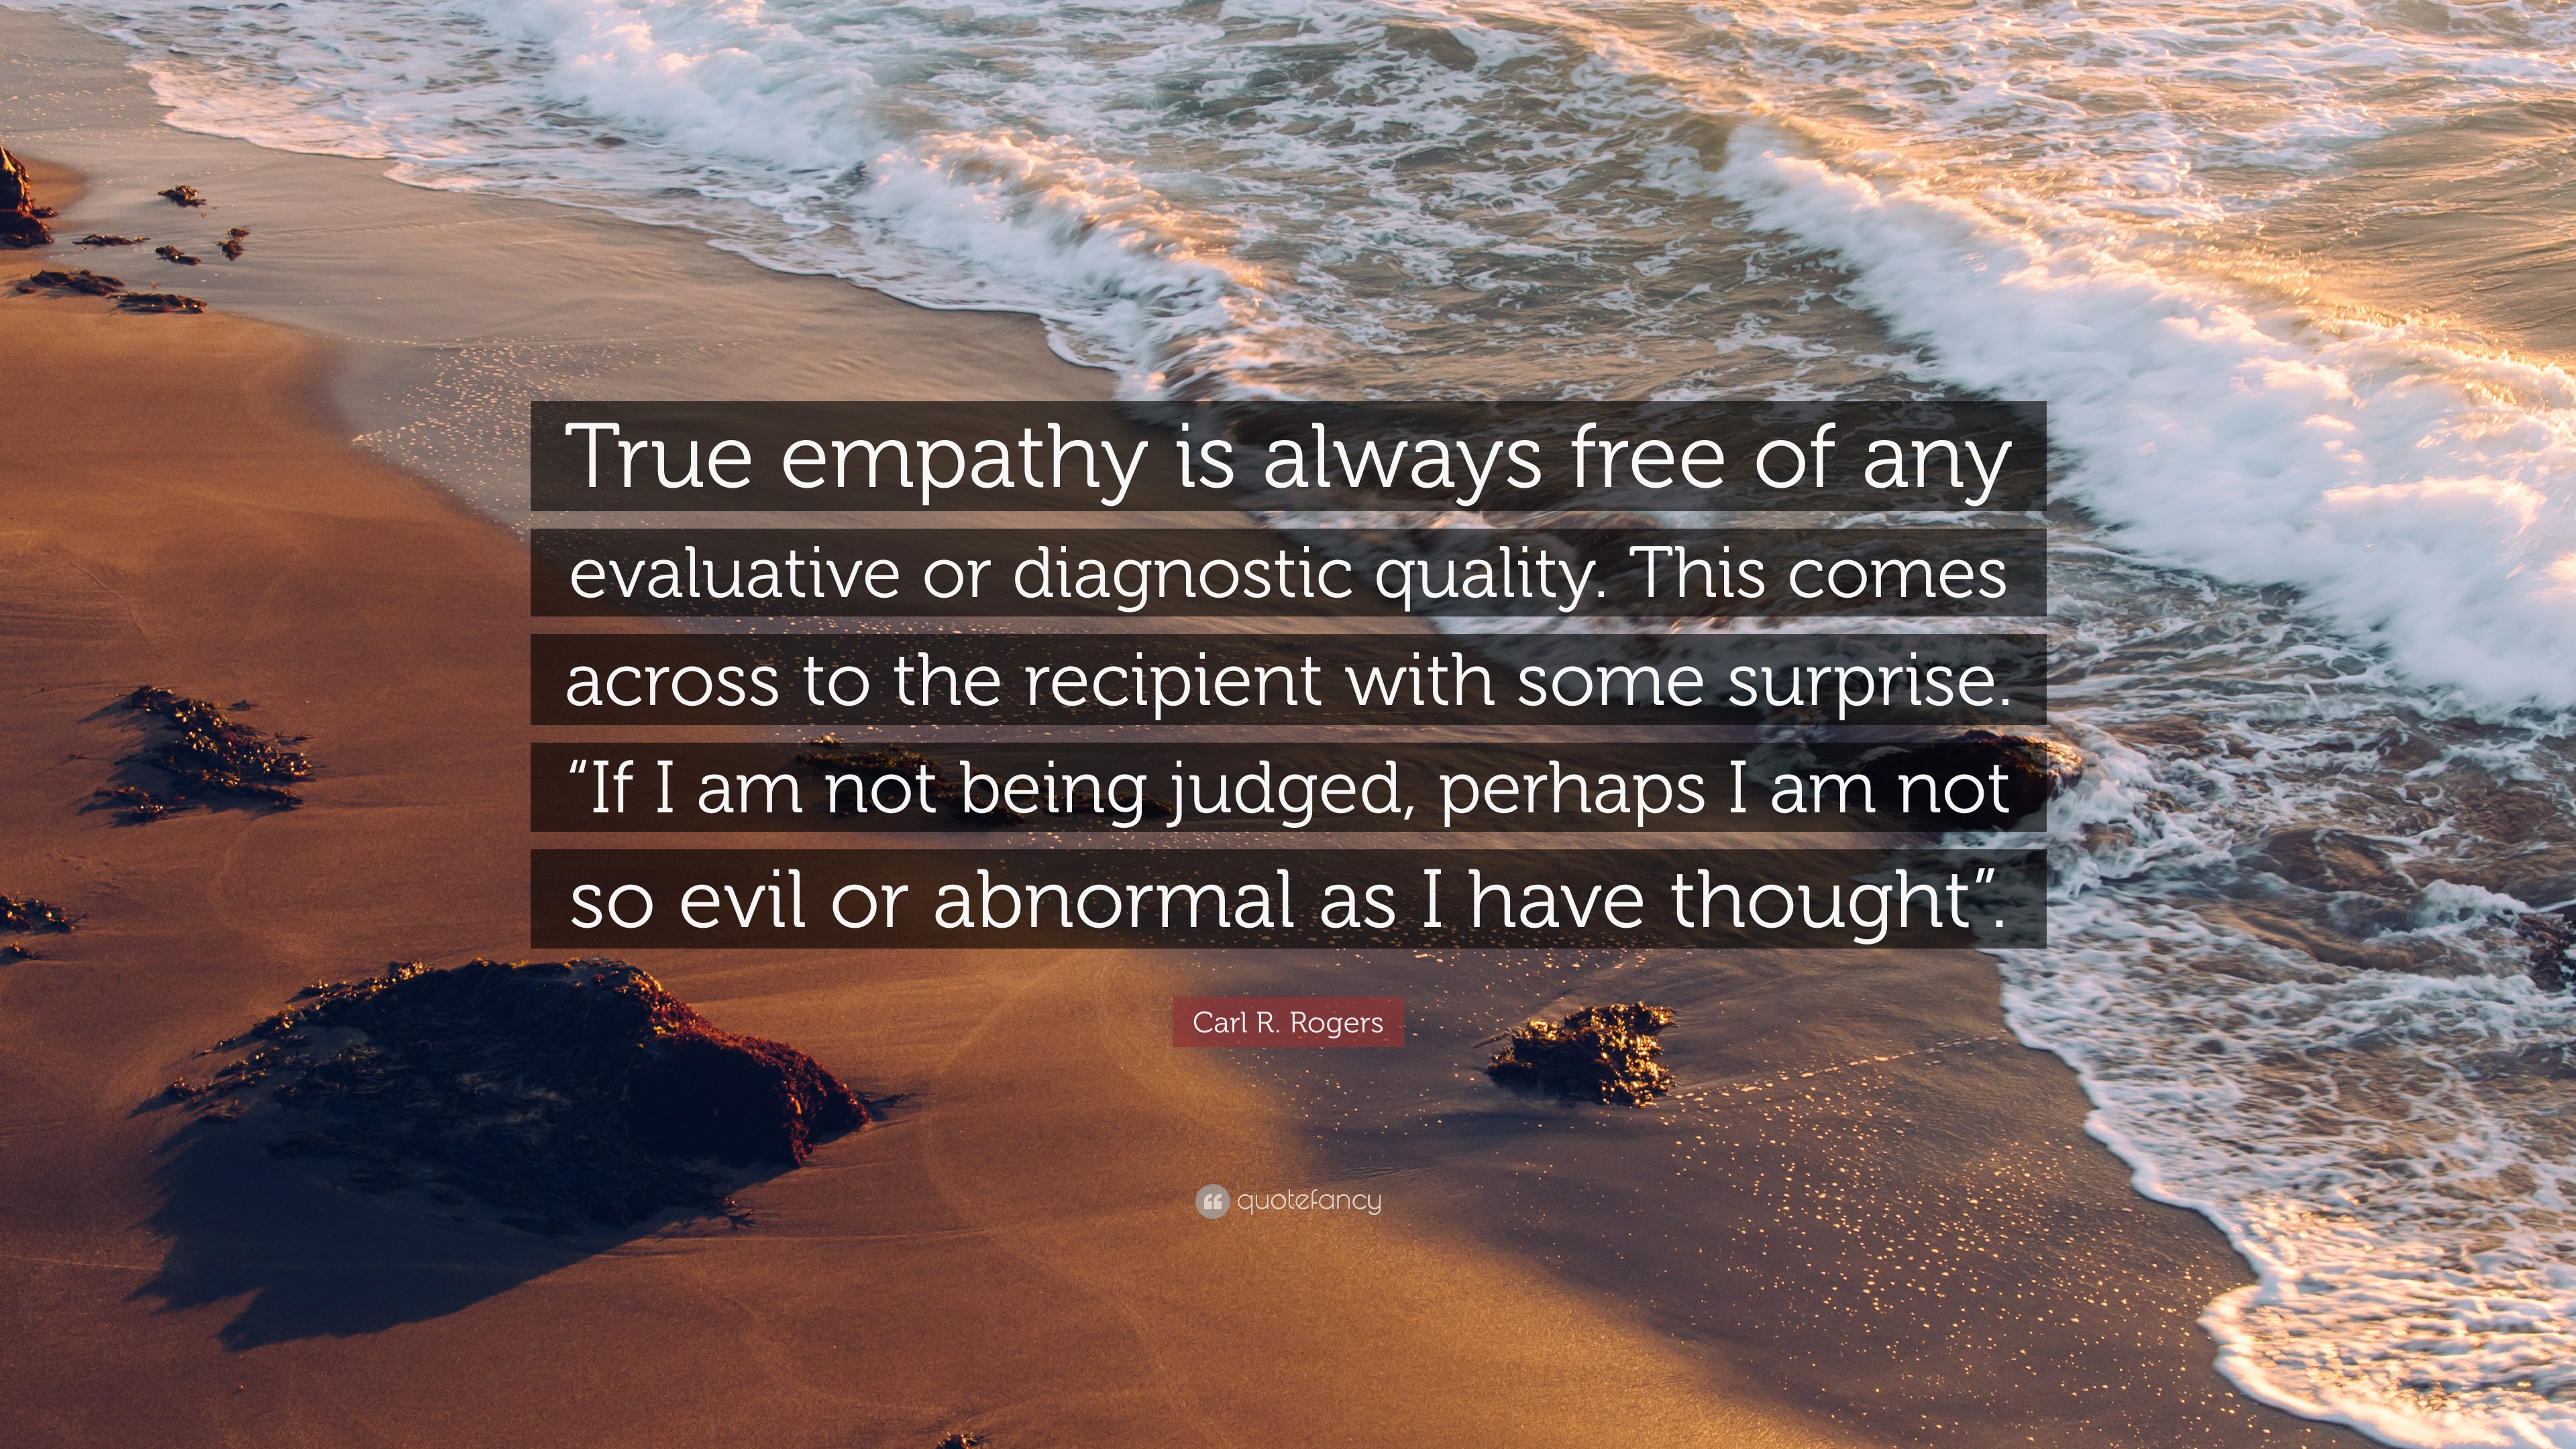 Carl R. Rogers Quote: “True empathy is always free of any evaluative or